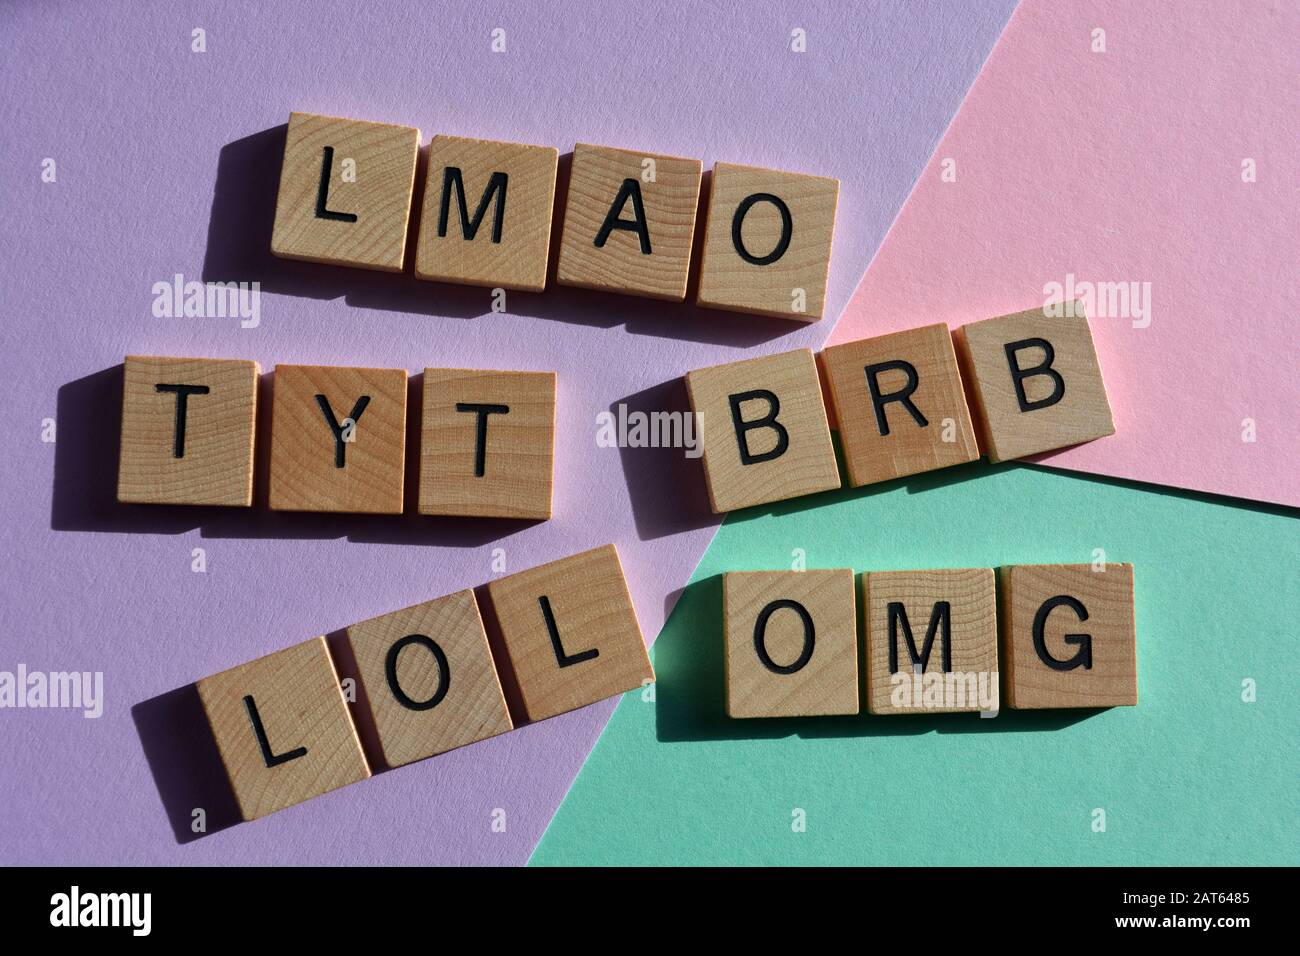 Internet slang, acronyms including BRB, Be Right Back, LOL, Lots of Laughs, OMG, Oh My God, and TYT, Take Your Time Stock Photo